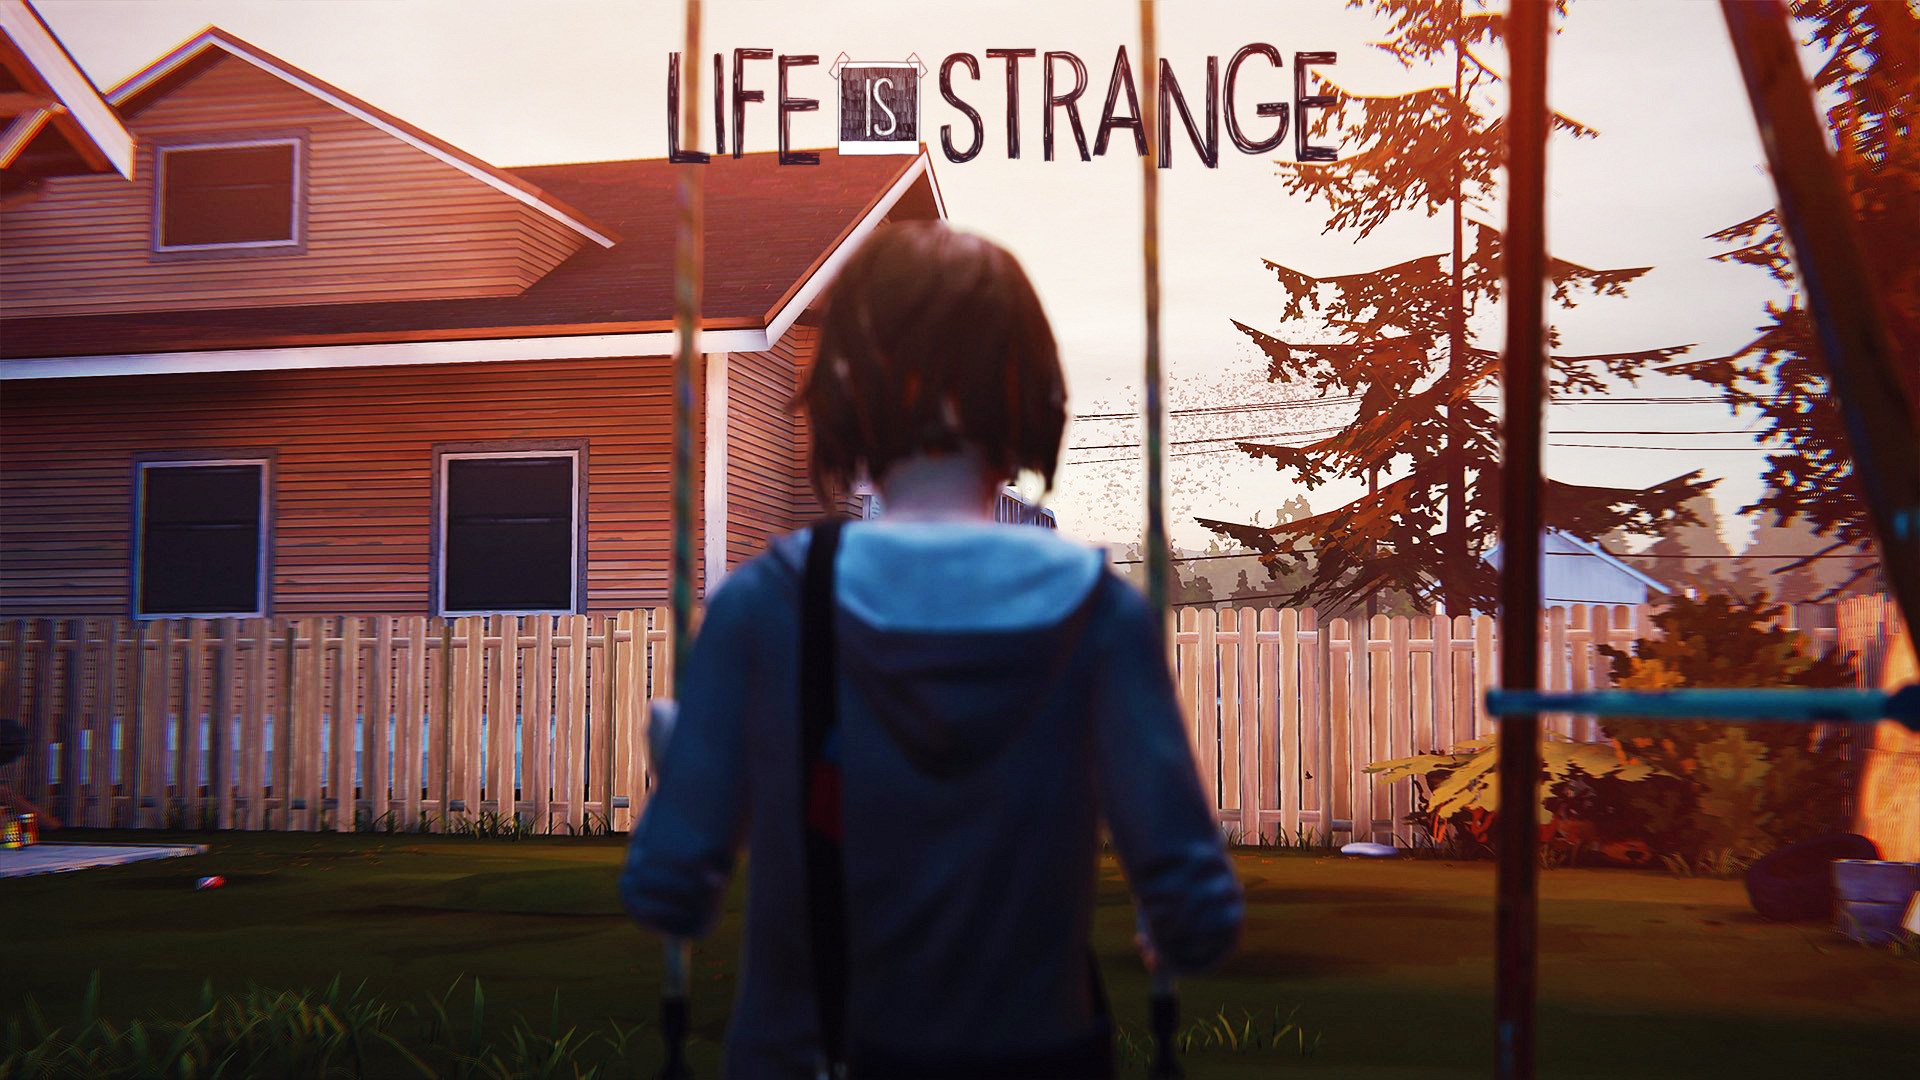 General 1920x1080 Life Is Strange Max Caulfield screen shot video games Square Enix video game characters swings house PC gaming